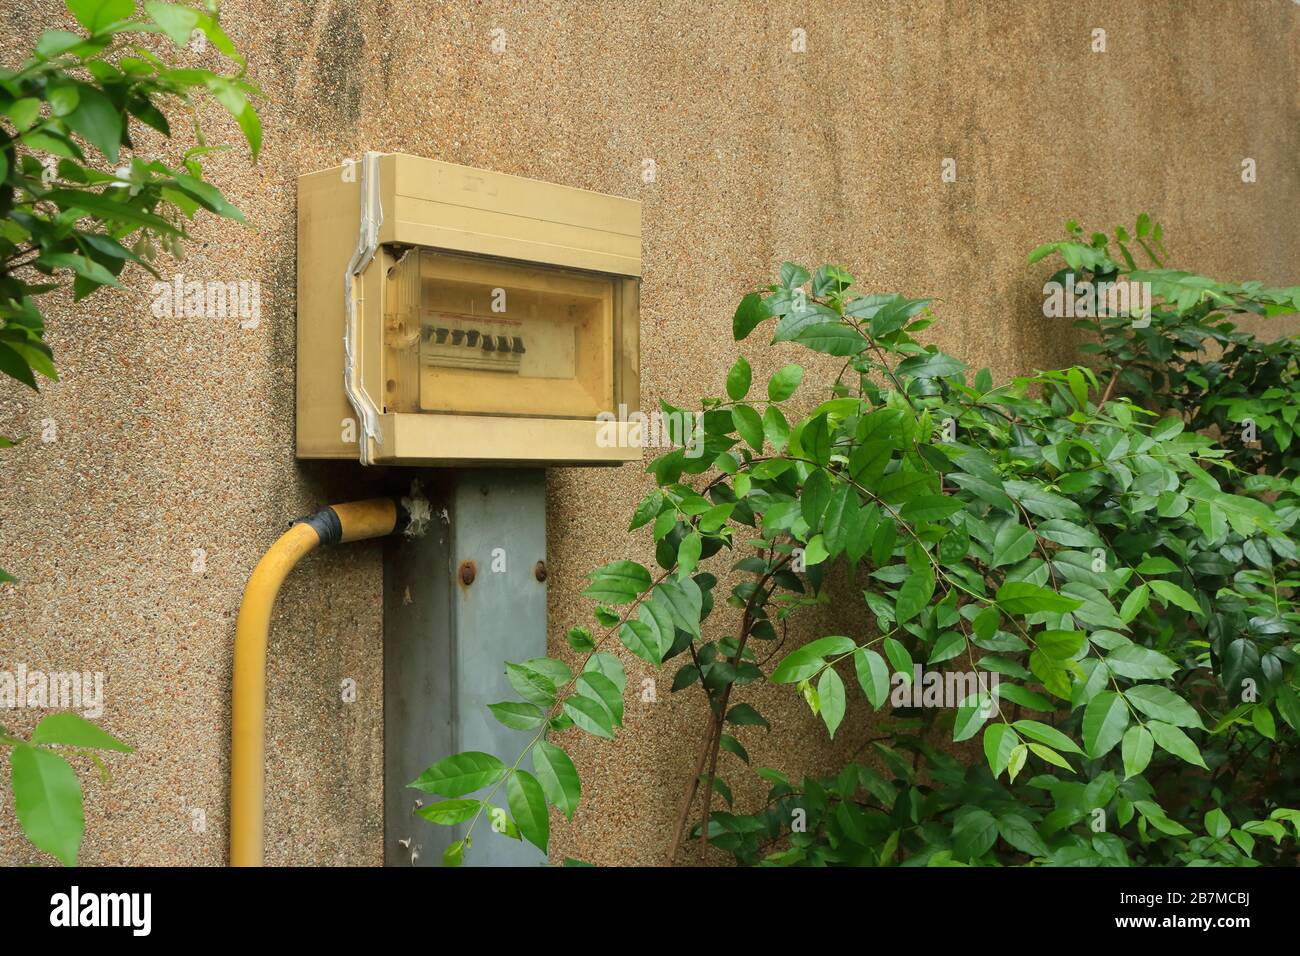 Closeup switchboard in the garden installed by attached to the wall and connected to electrical conduit and wire way Stock Photo